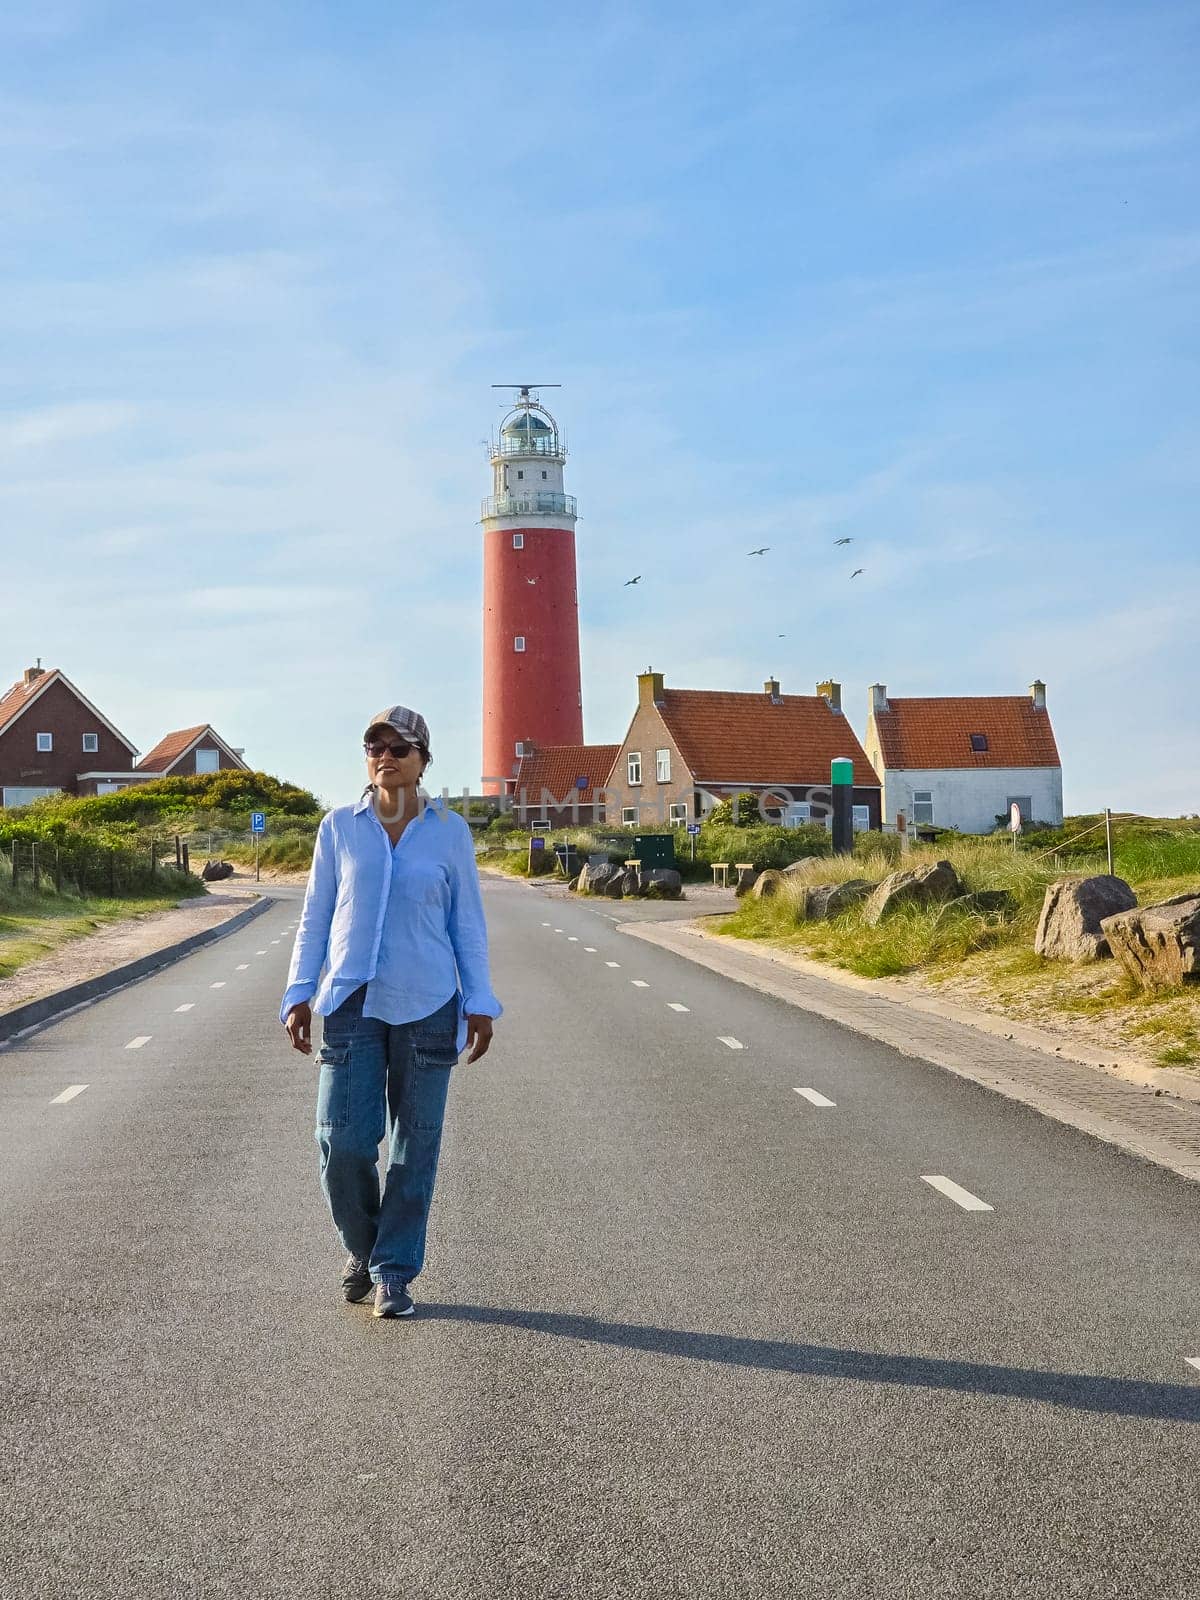 A solitary man walks down a deserted road, with a majestic lighthouse towering in the background, casting a guiding light by fokkebok